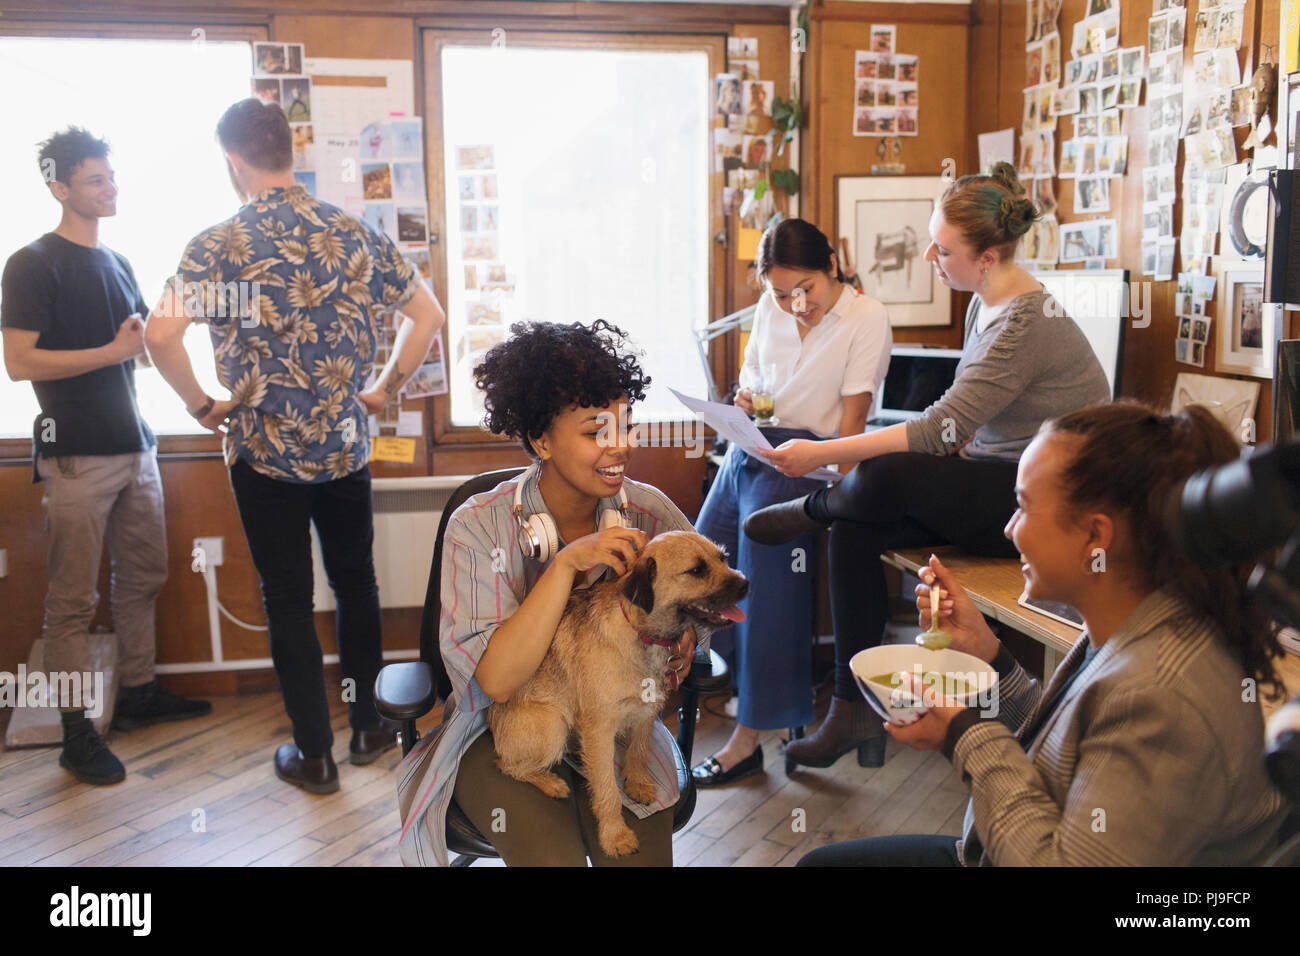 Creative business people with dog working and eating in office Stock Photo